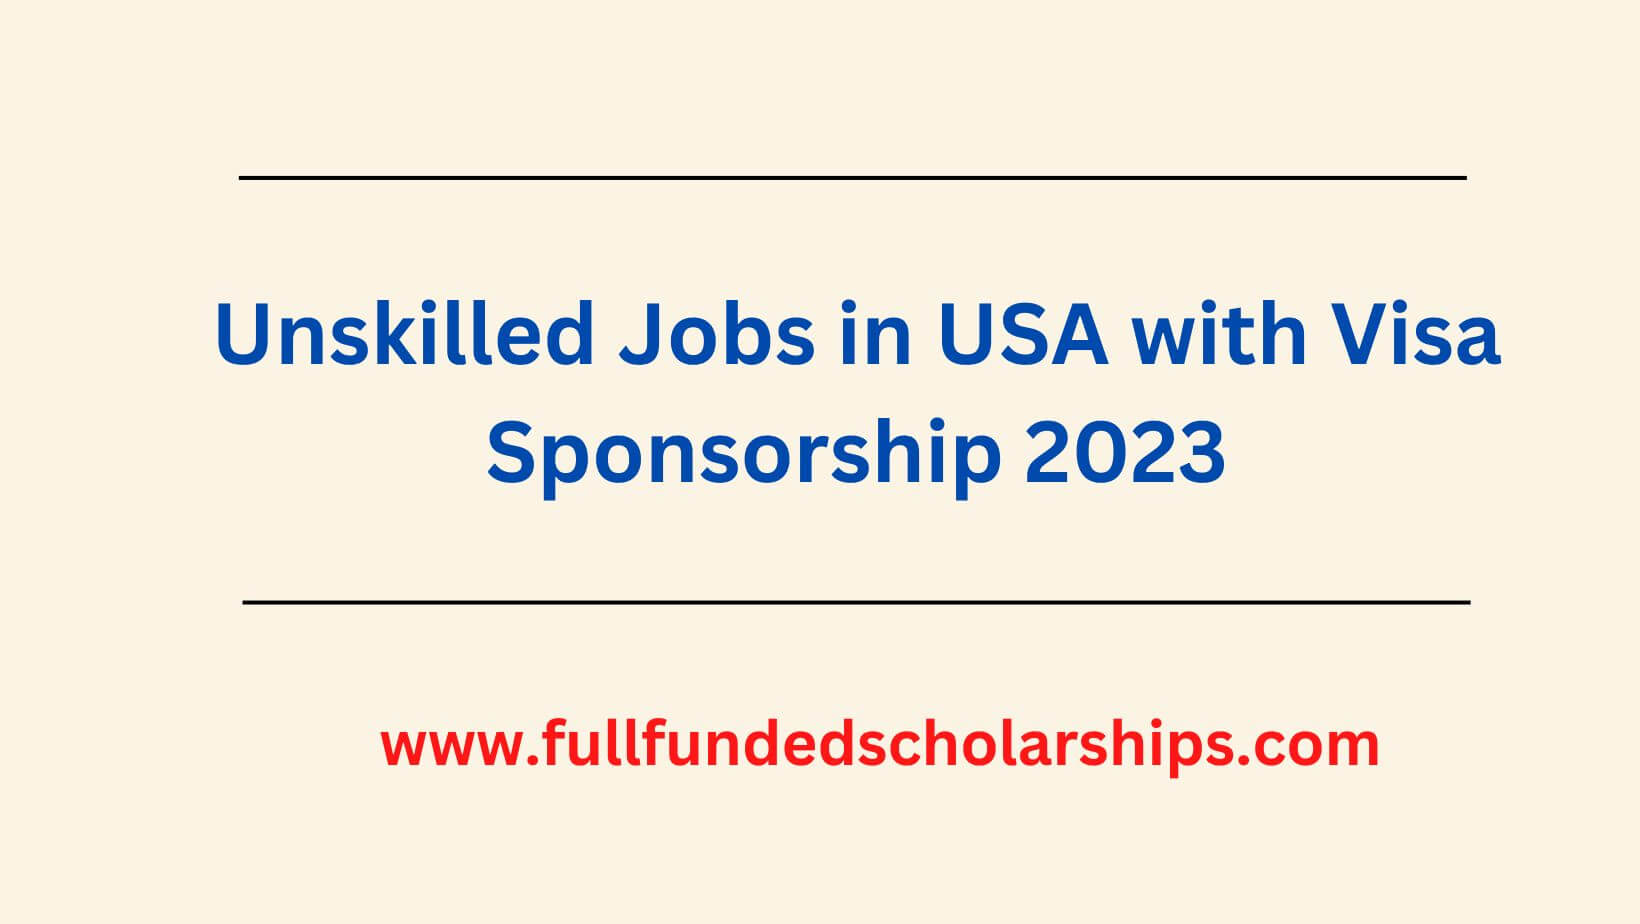 Unskilled Jobs in USA with Visa Sponsorship 2023